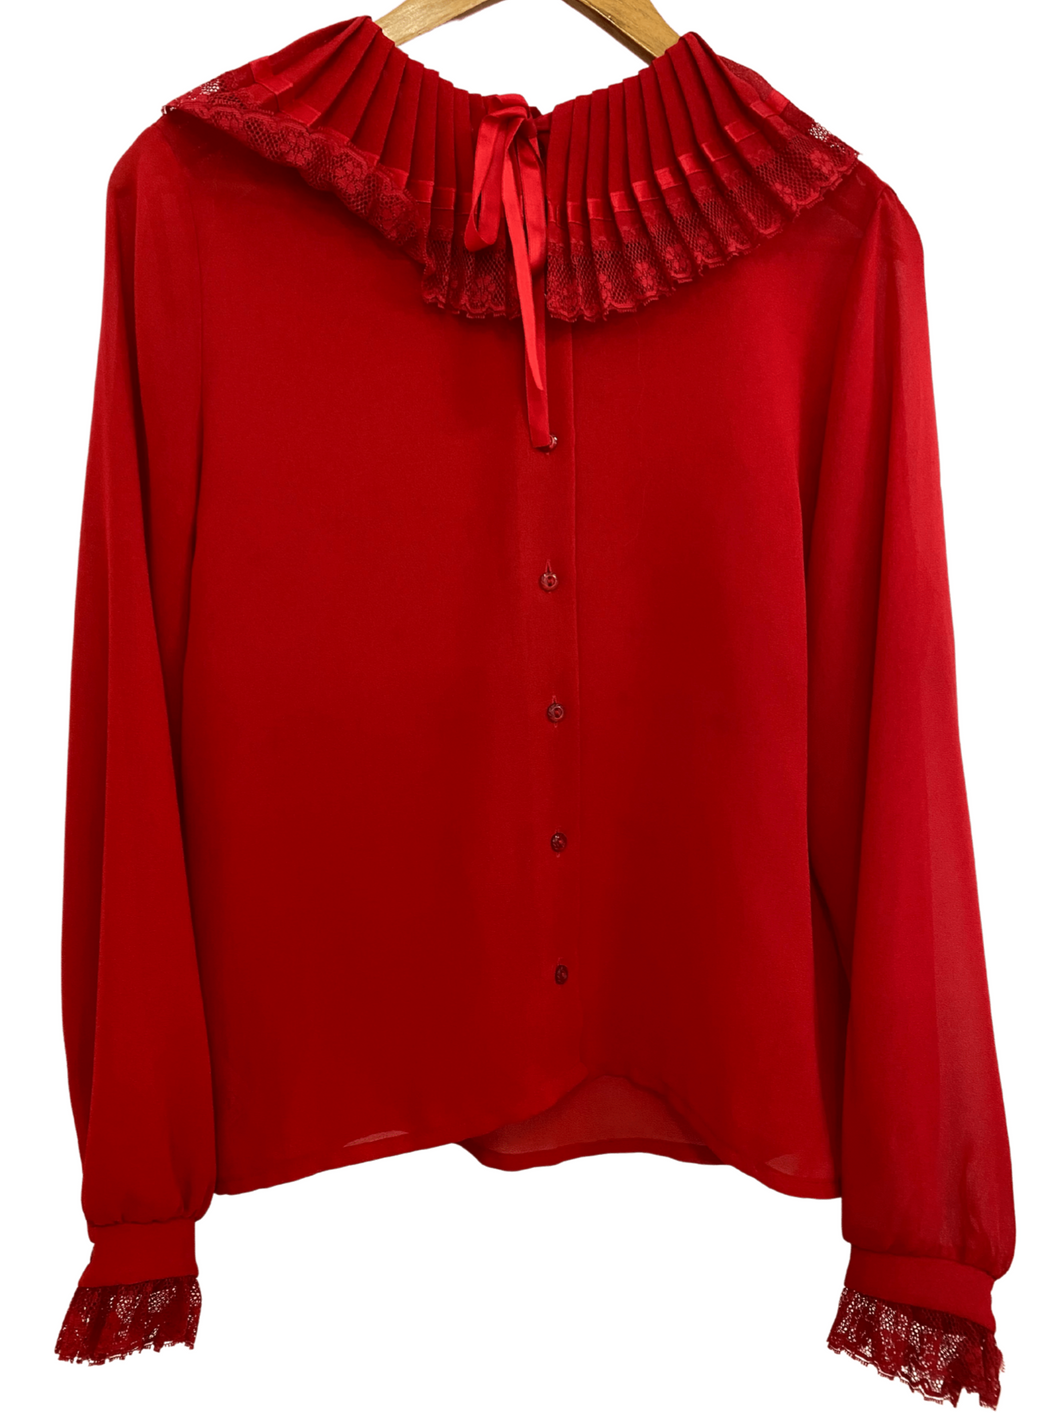 Red Long Sleeved Top